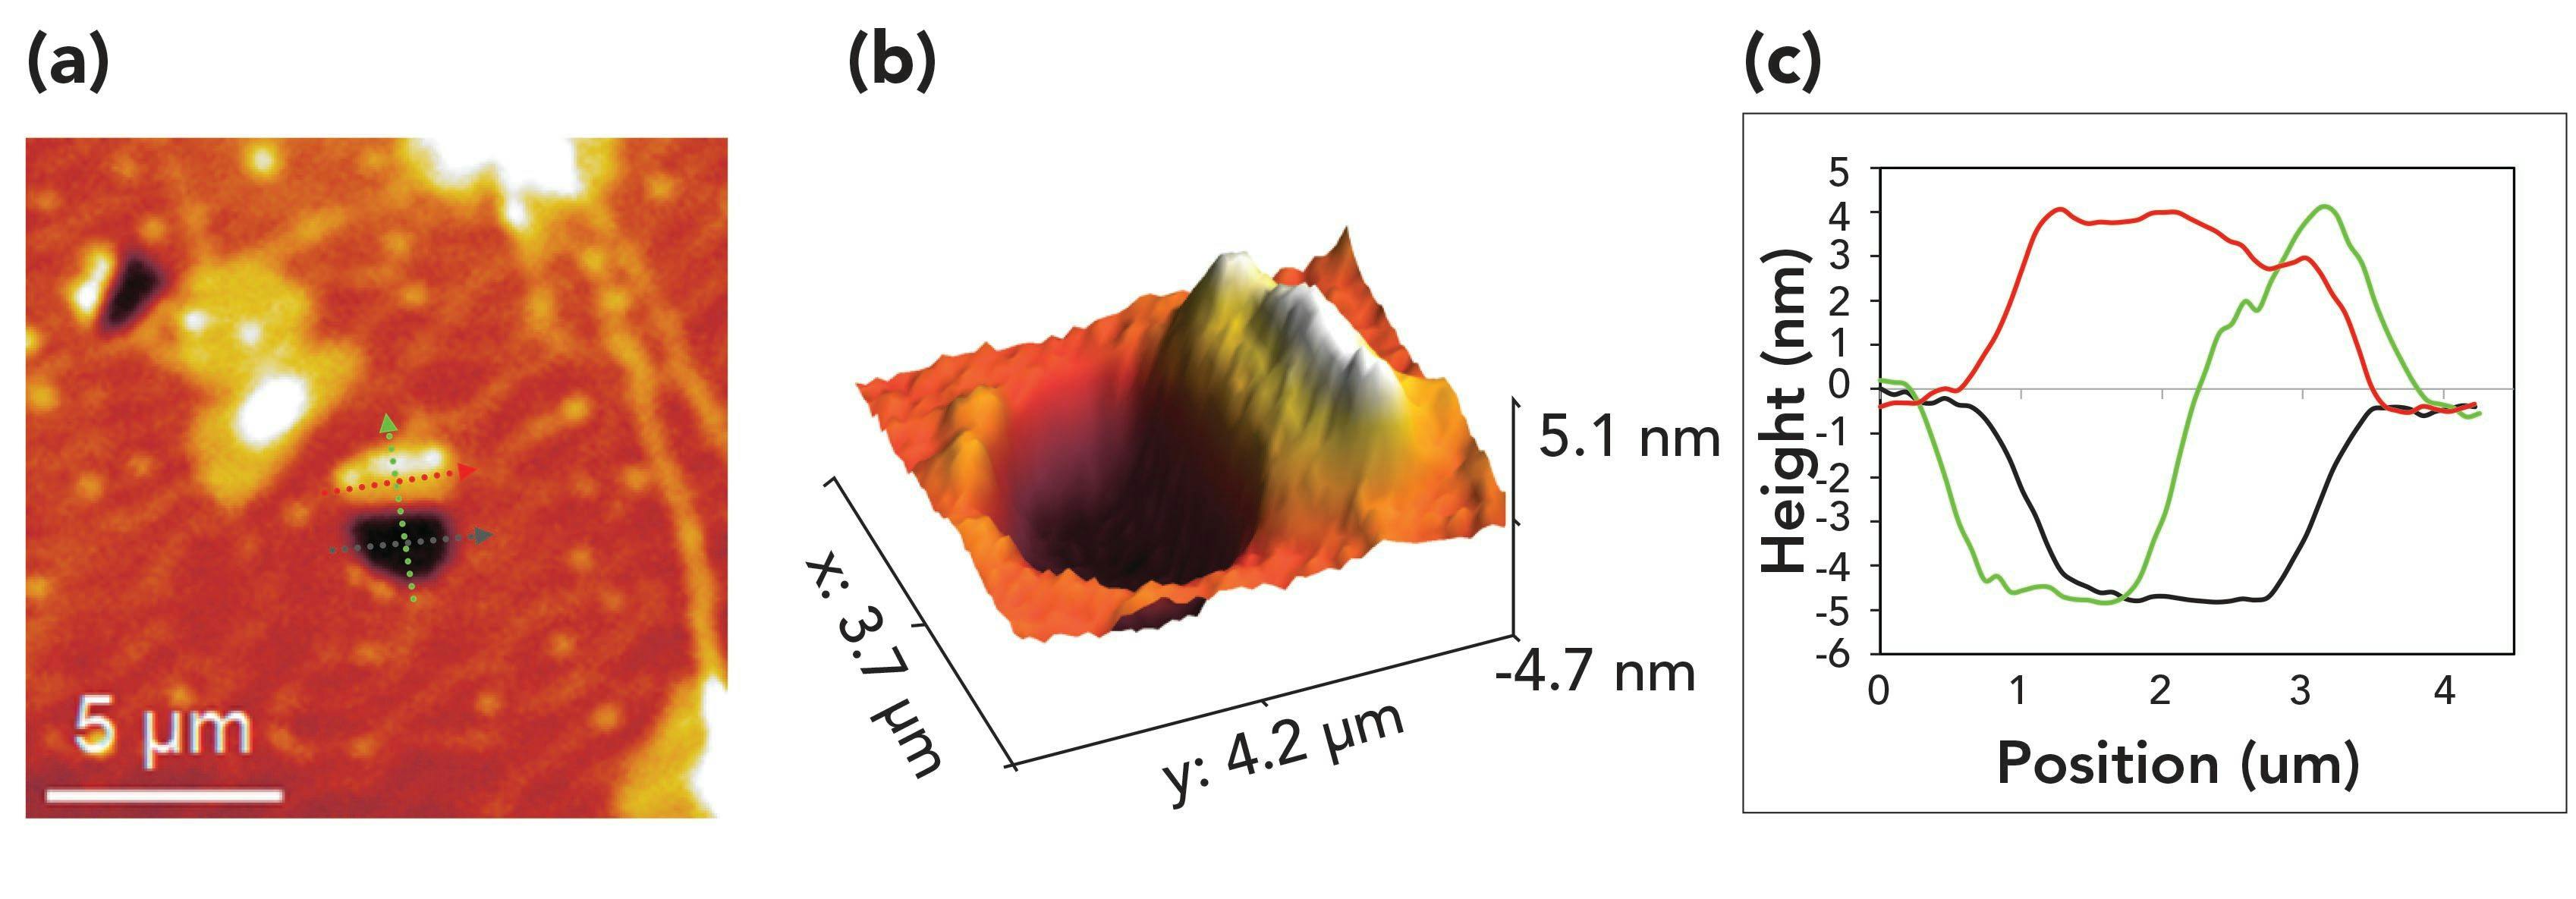 Figure 2: 2D (a) and 3D (b) phase shifting interferometry images and profiles of folded graphene (c).